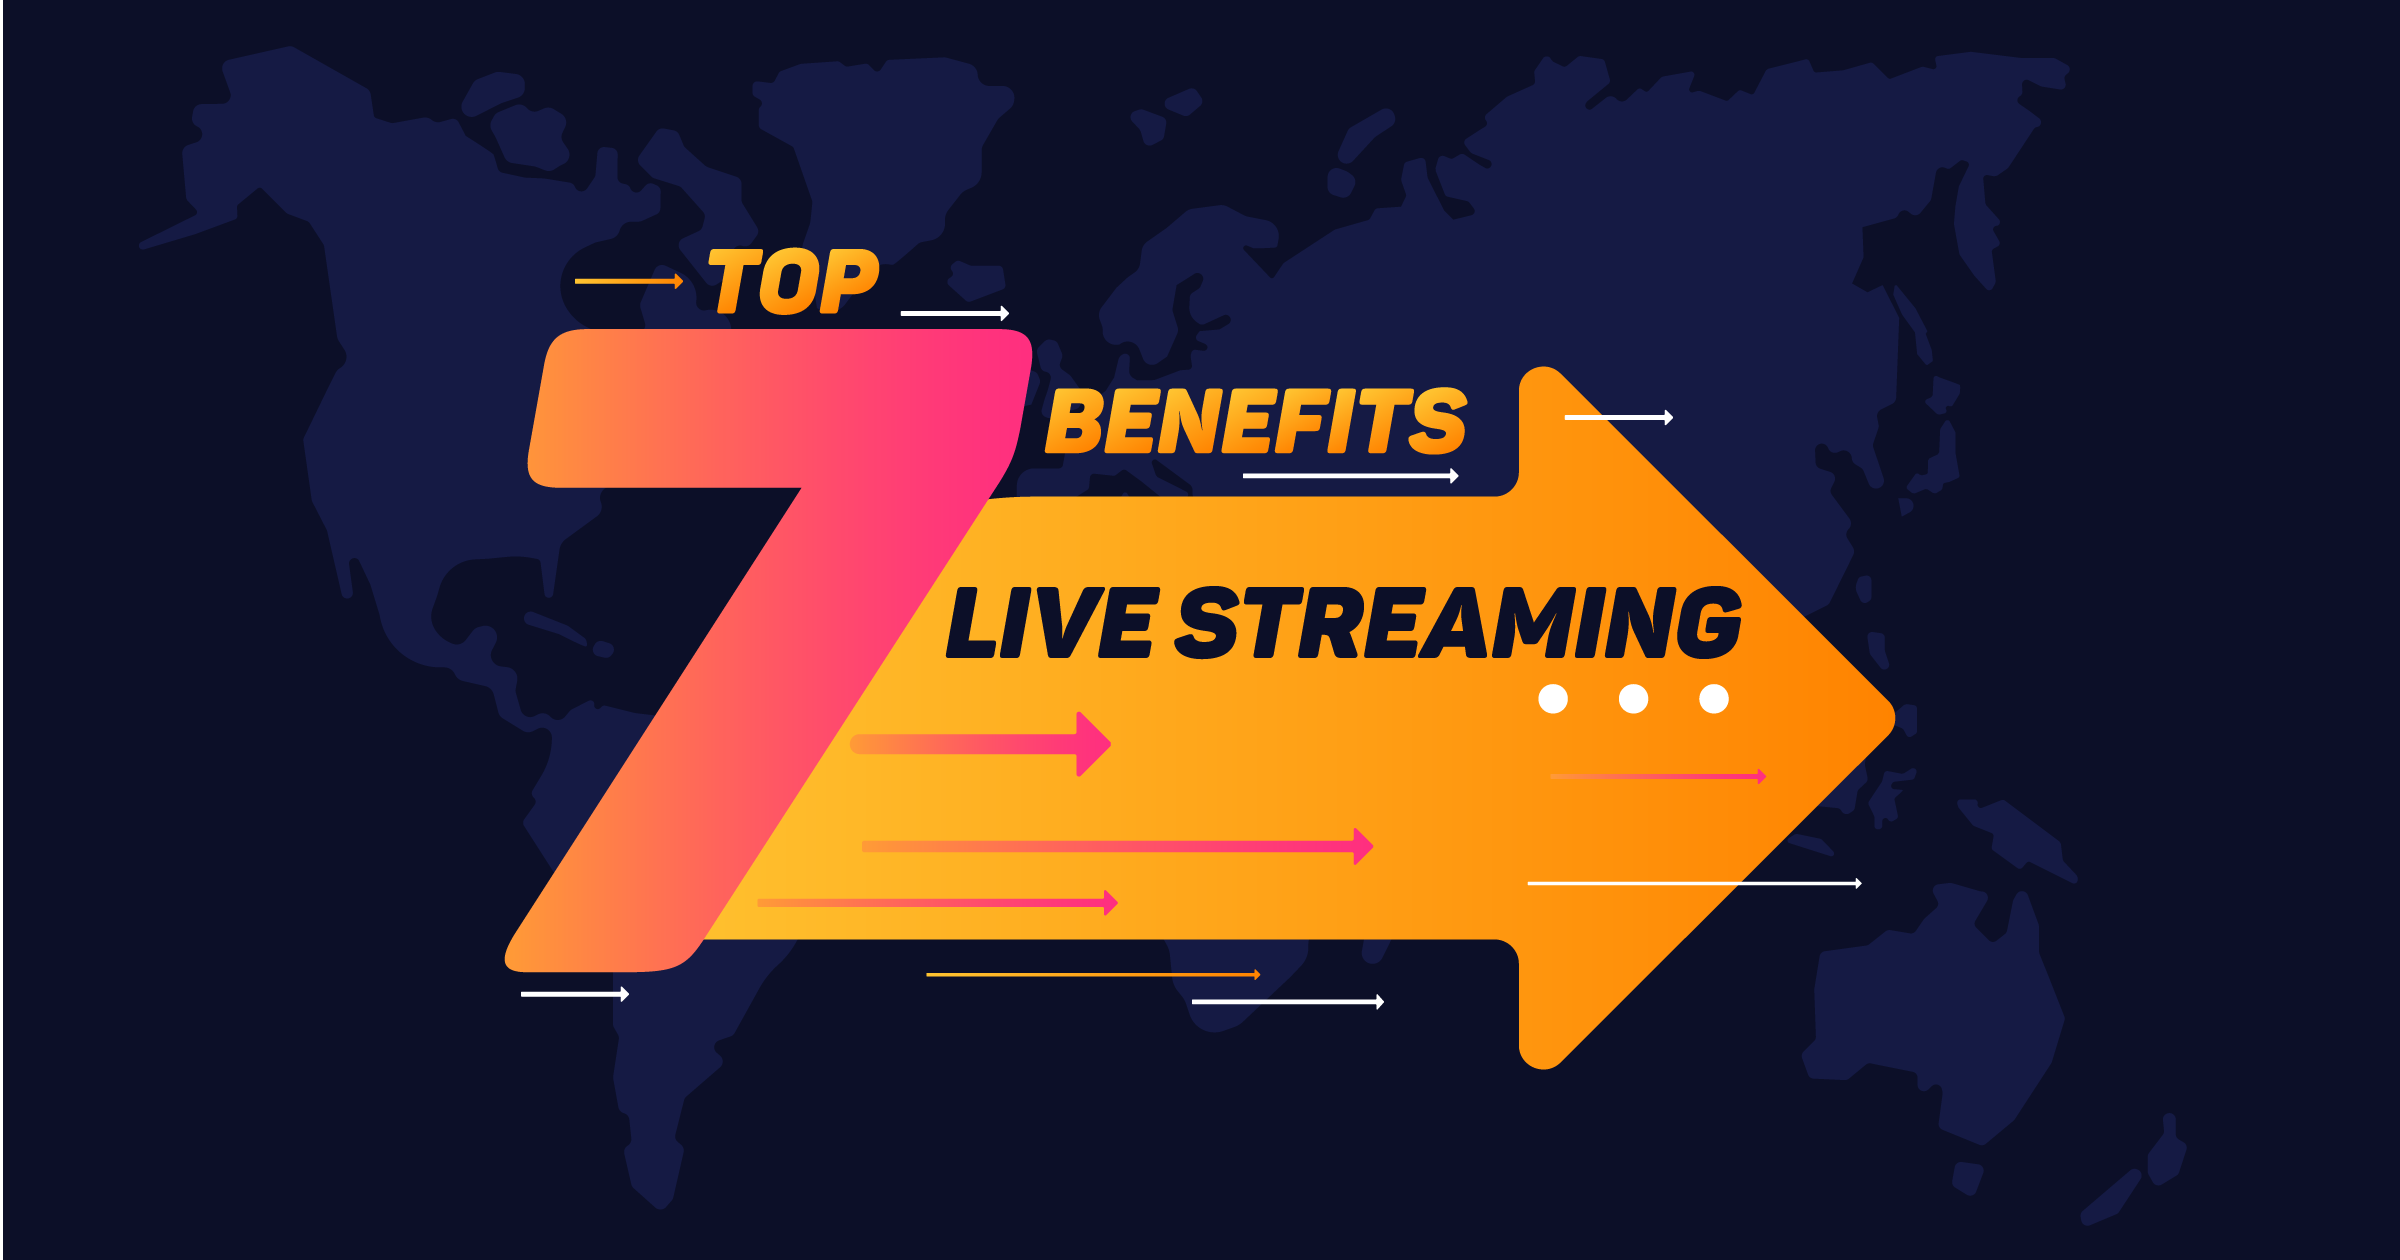 Top 7 benefits of live streaming